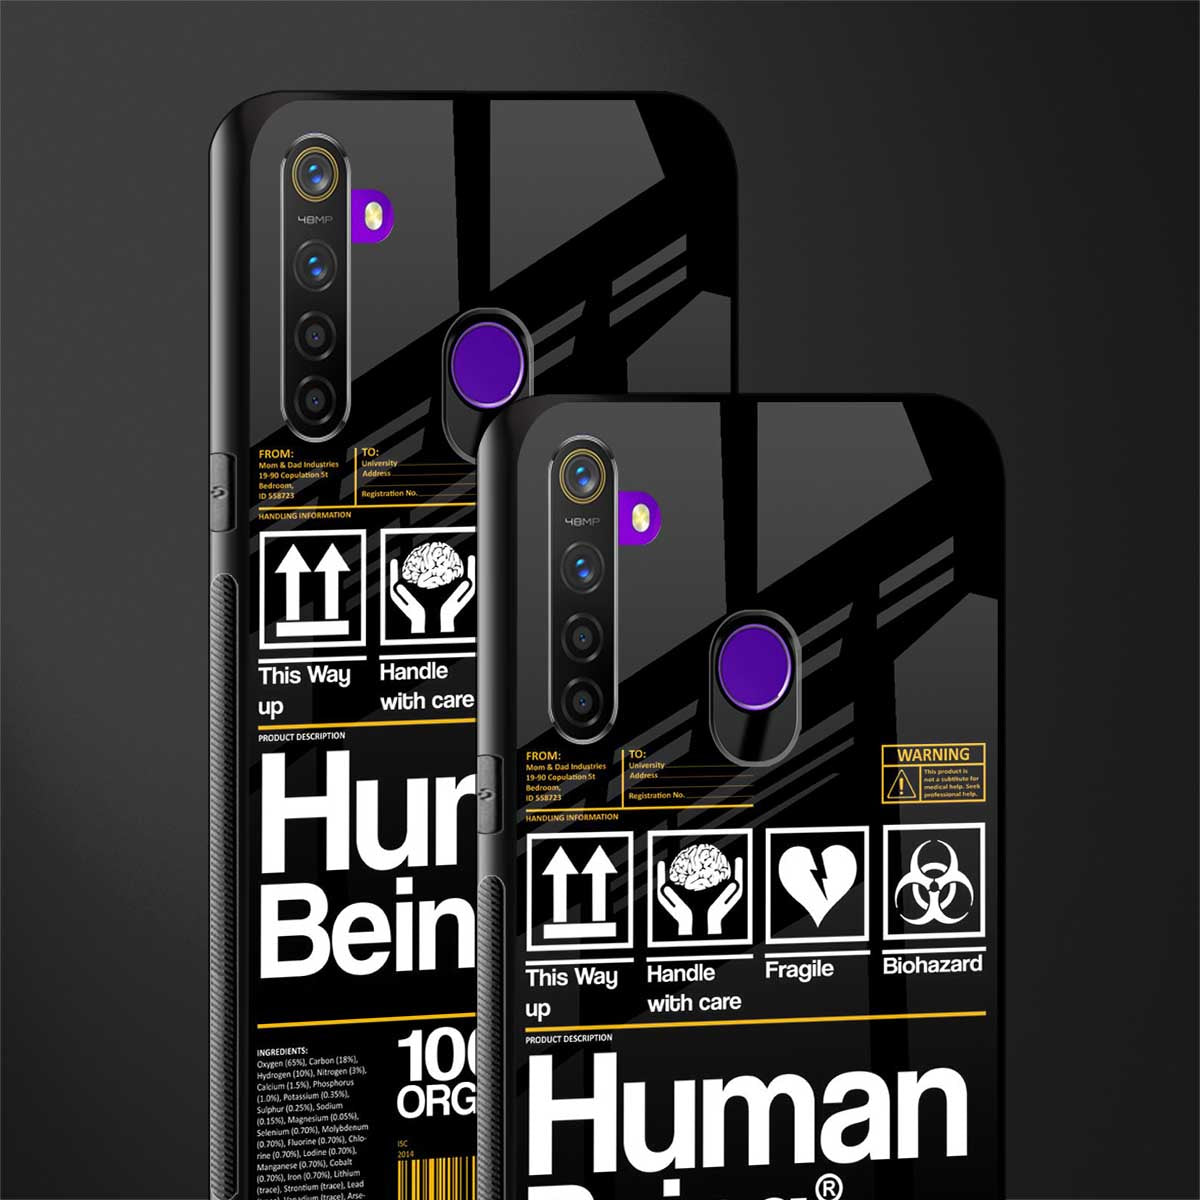 human being label phone cover for realme 5 pro